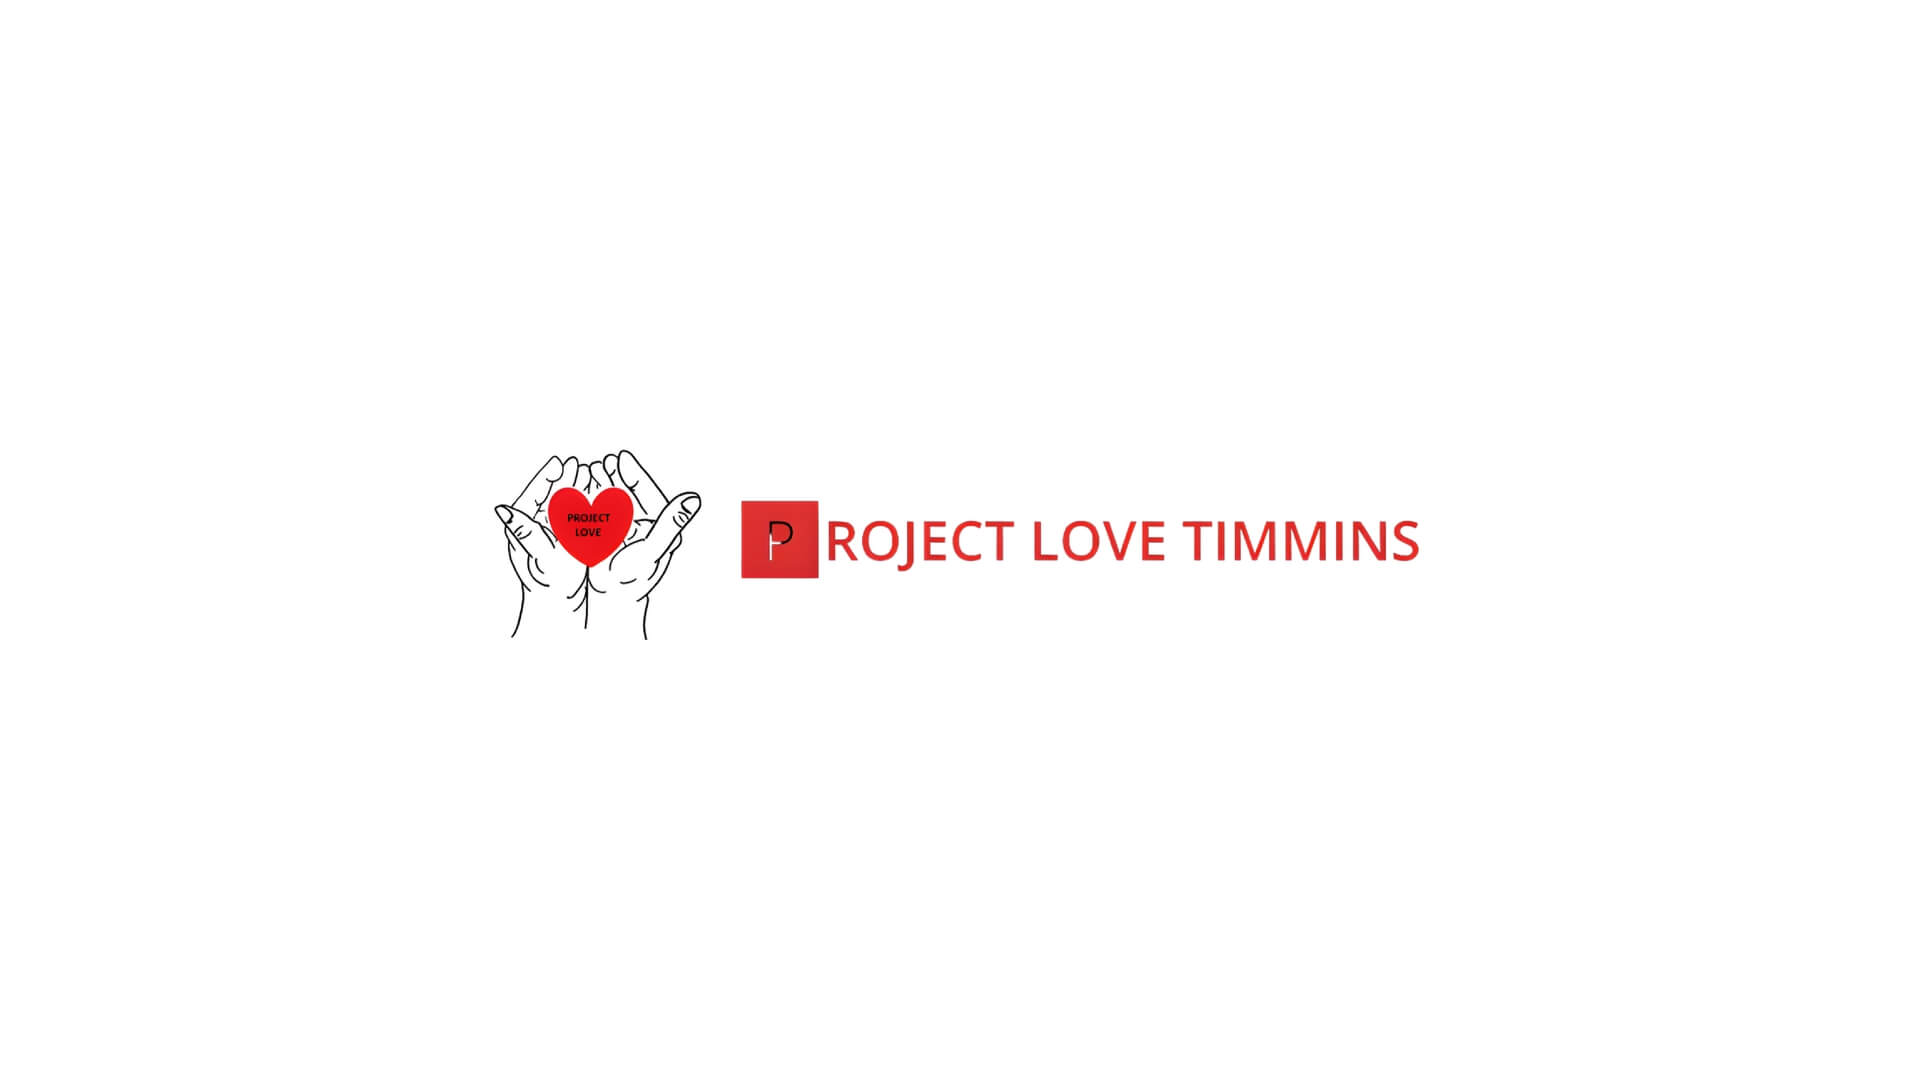 Timmins Care Logo for project love timmins featuring two hands forming a heart shape above a heart icon, with red and black text. Cochrane District Social Services Administration Board